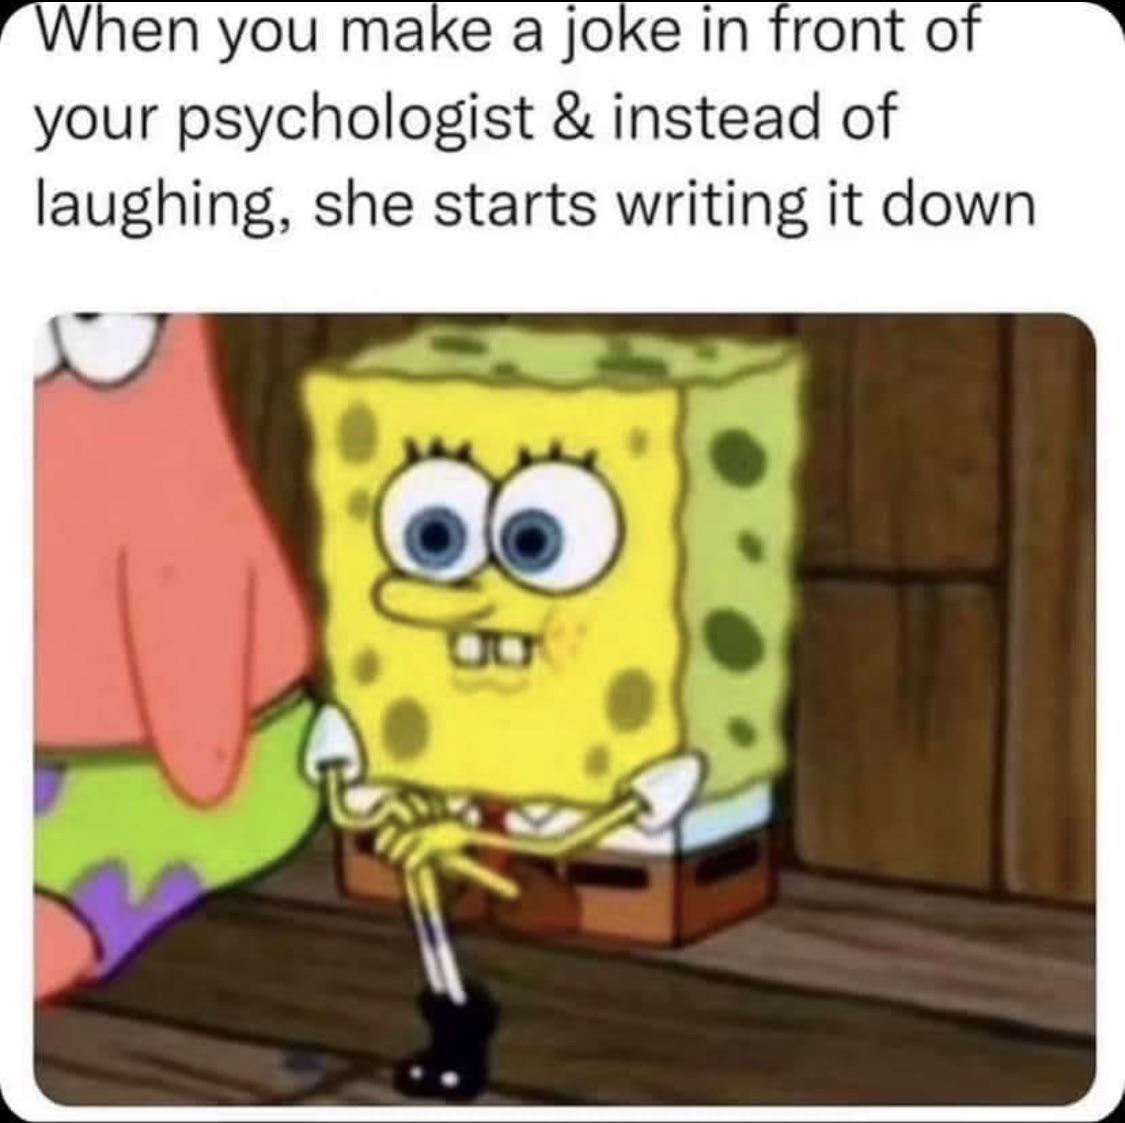 sitting on the edge of the bed meme - When you make a joke in front of your psychologist & instead of laughing, she starts writing it down